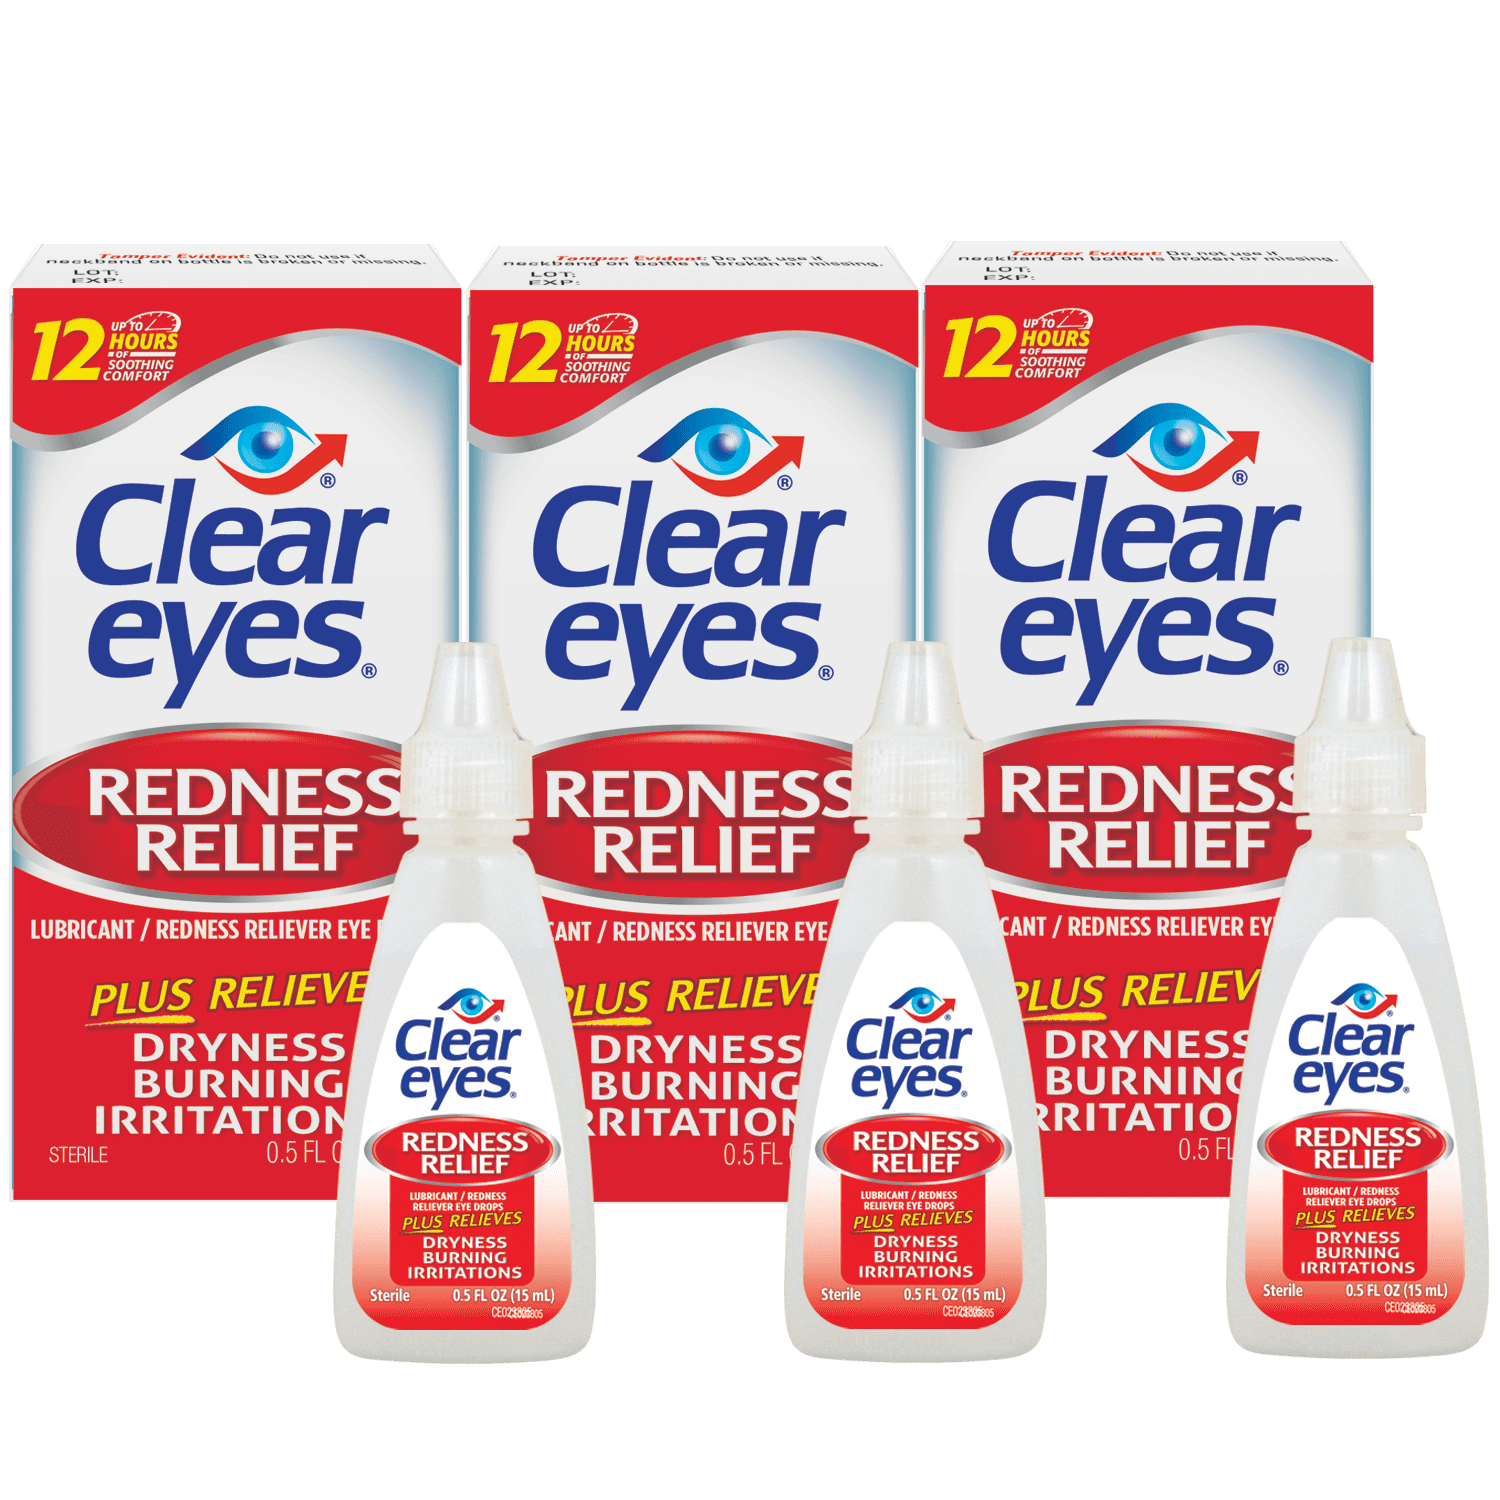 Photo 1 of Clear Eyes Redness Relief Eye Drops, 0.5 FL OZ, 3 Pack
exp 01/2022